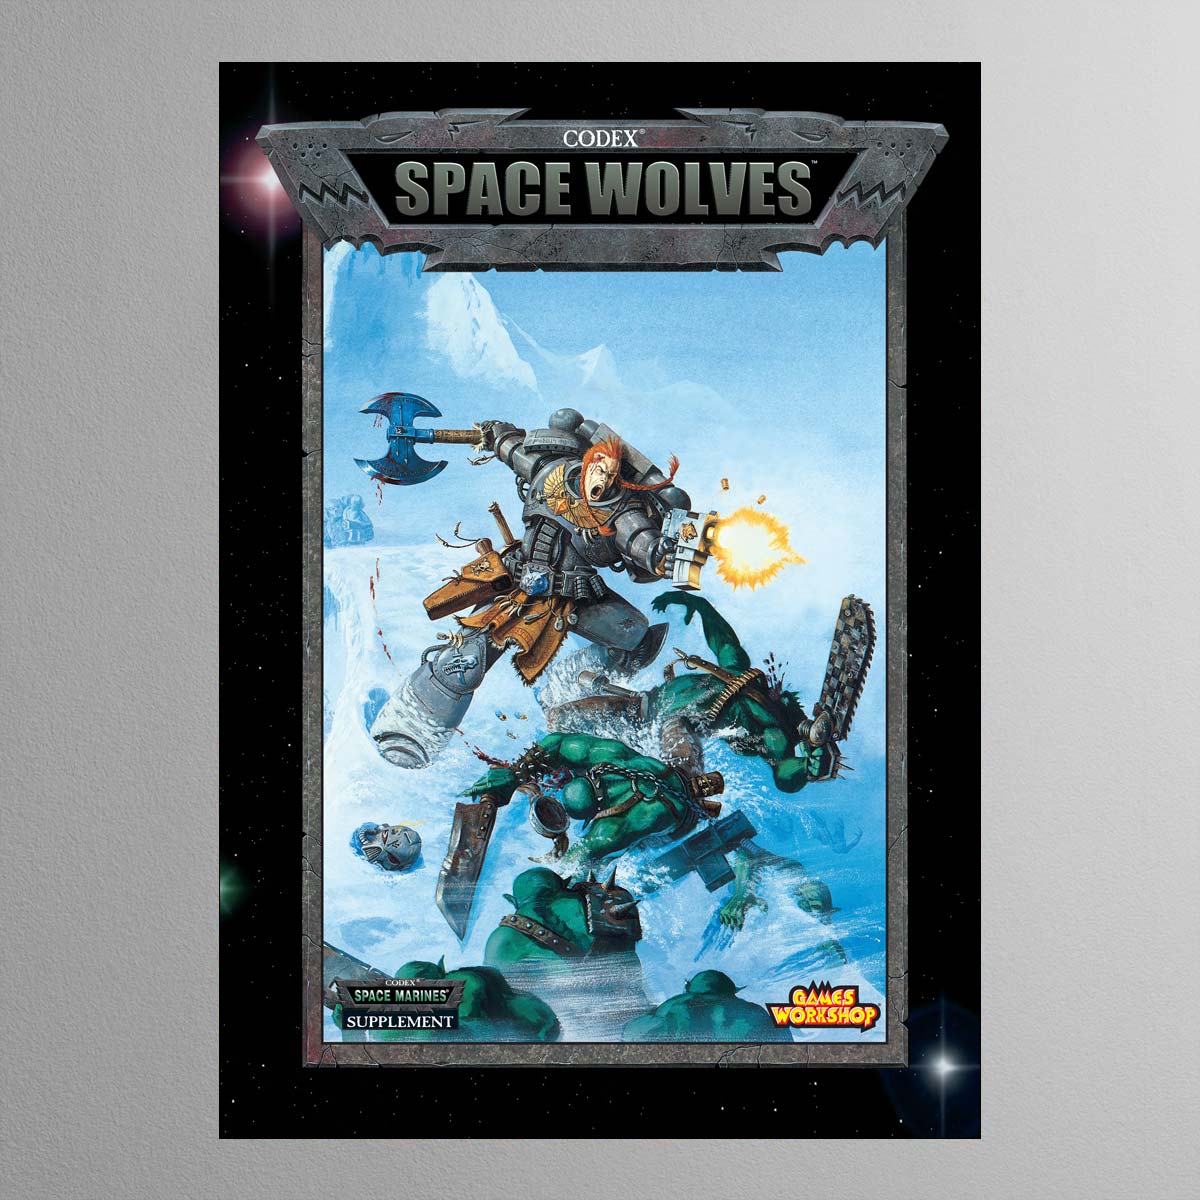 Warhammer 40,000 3rd Edition – Space Wolves – Print